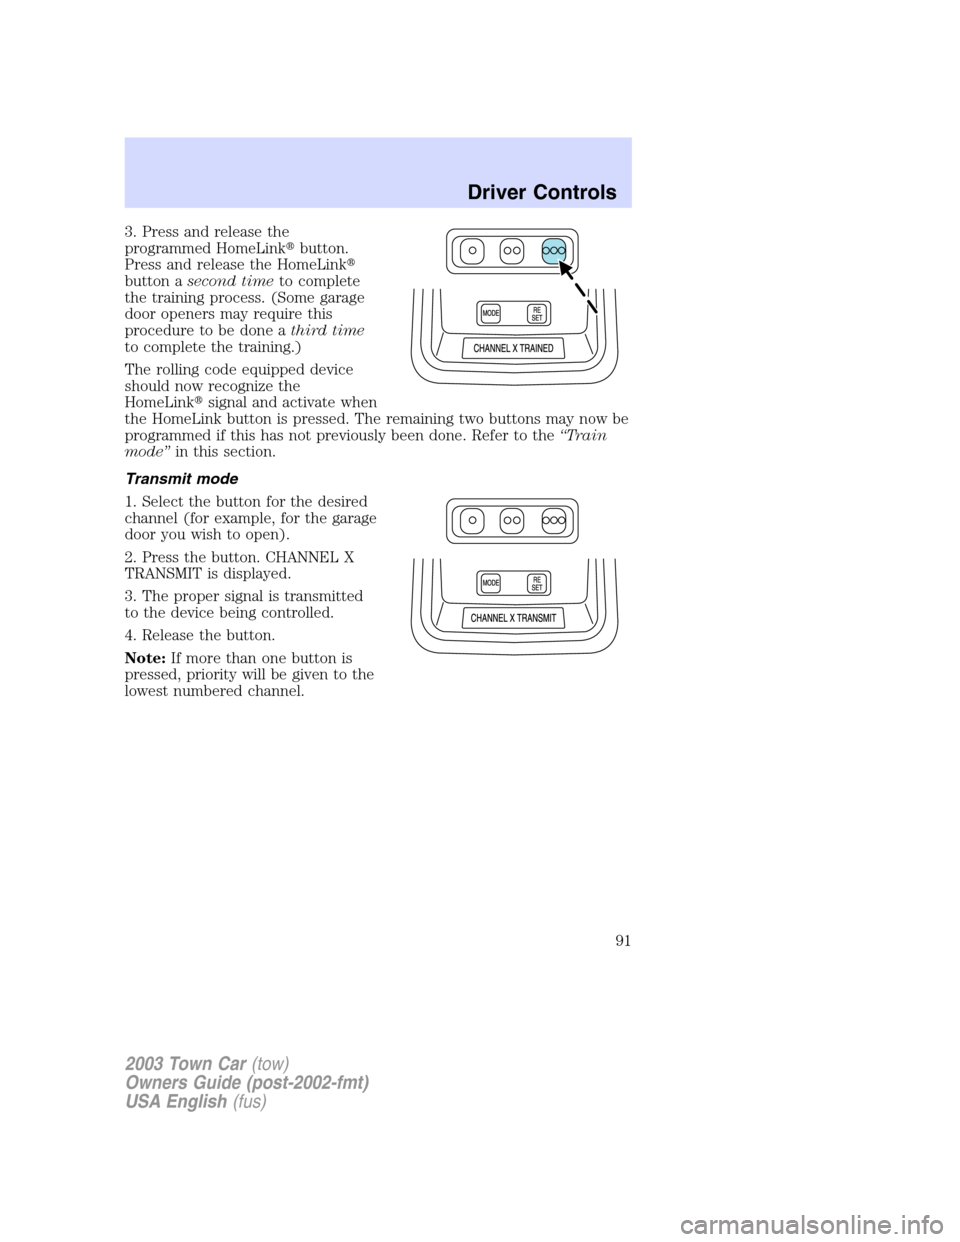 LINCOLN TOWN CAR 2003  Owners Manual 3. Press and release the
programmed HomeLinkbutton.
Press and release the HomeLink
button asecond timeto complete
the training process. (Some garage
door openers may require this
procedure to be don